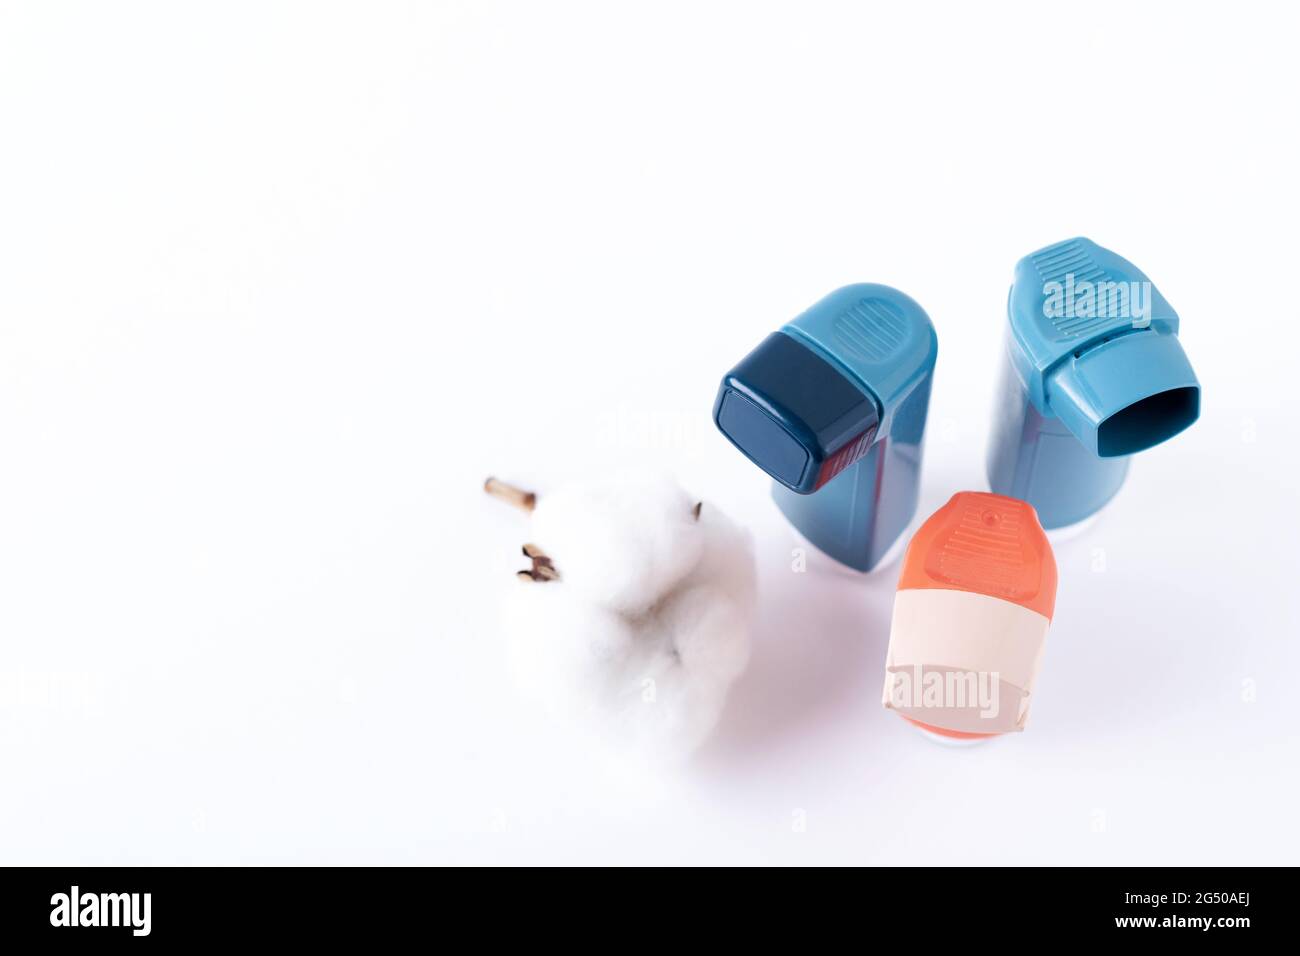 Three asthma inhalers on an isolated white background. Medical concept. Stock Photo